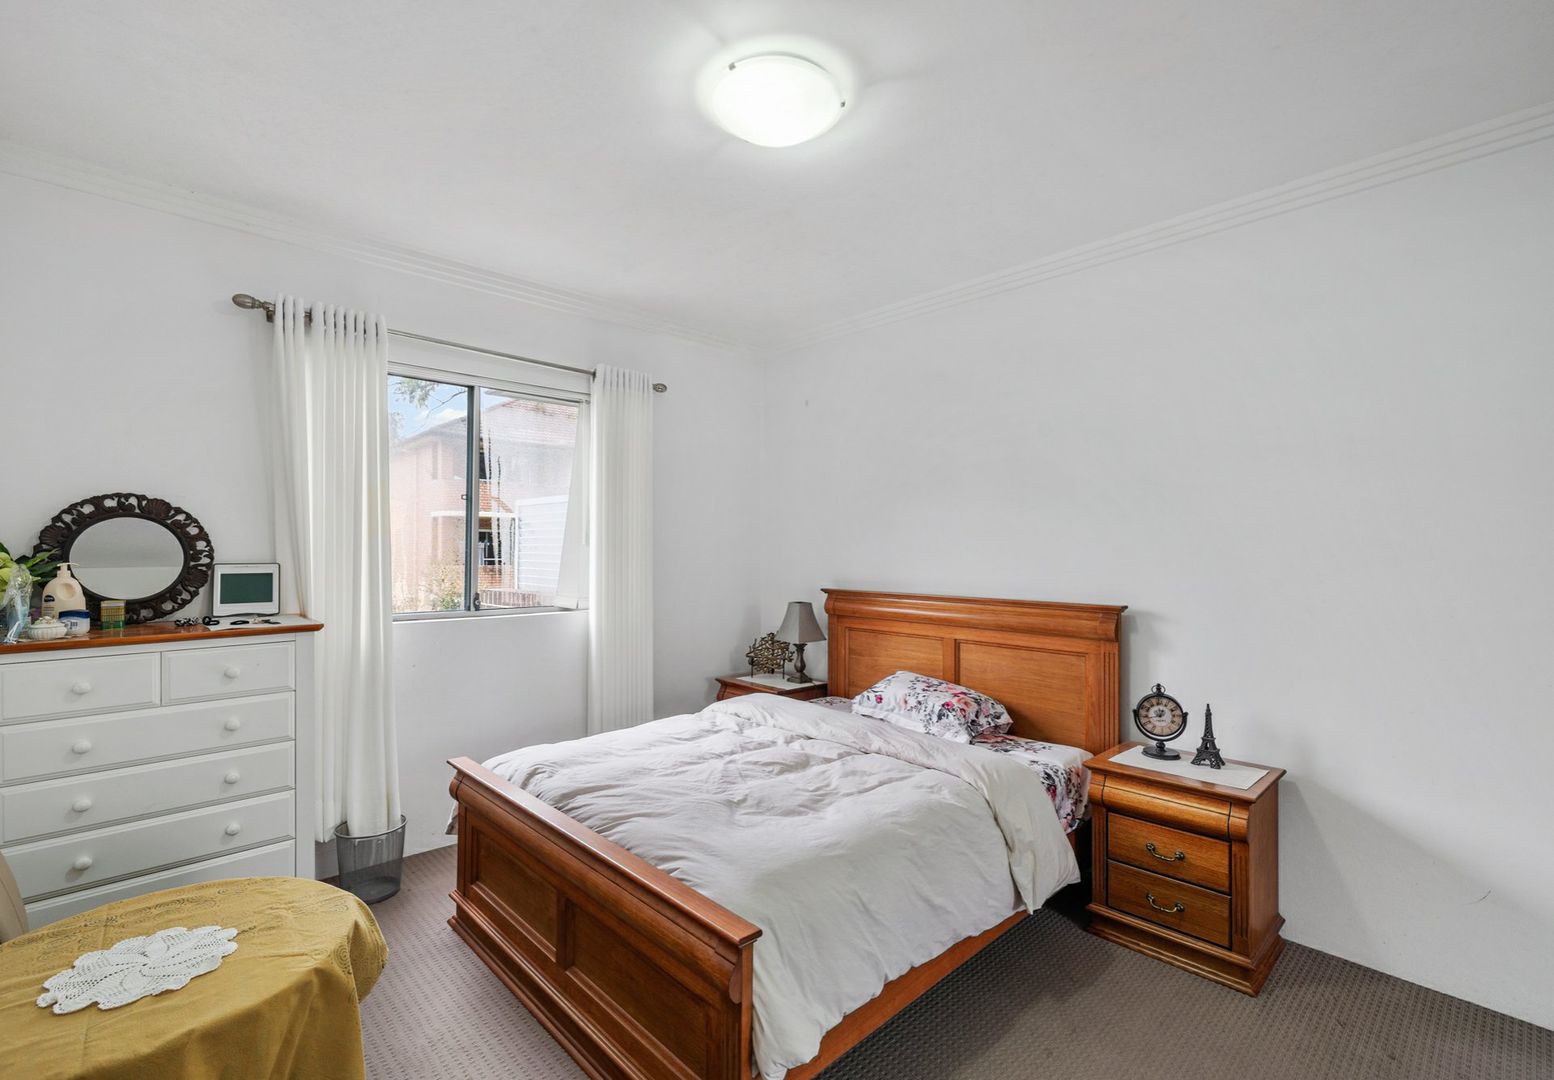 14/61-65 Cairds Avenue, Bankstown NSW 2200, Image 2